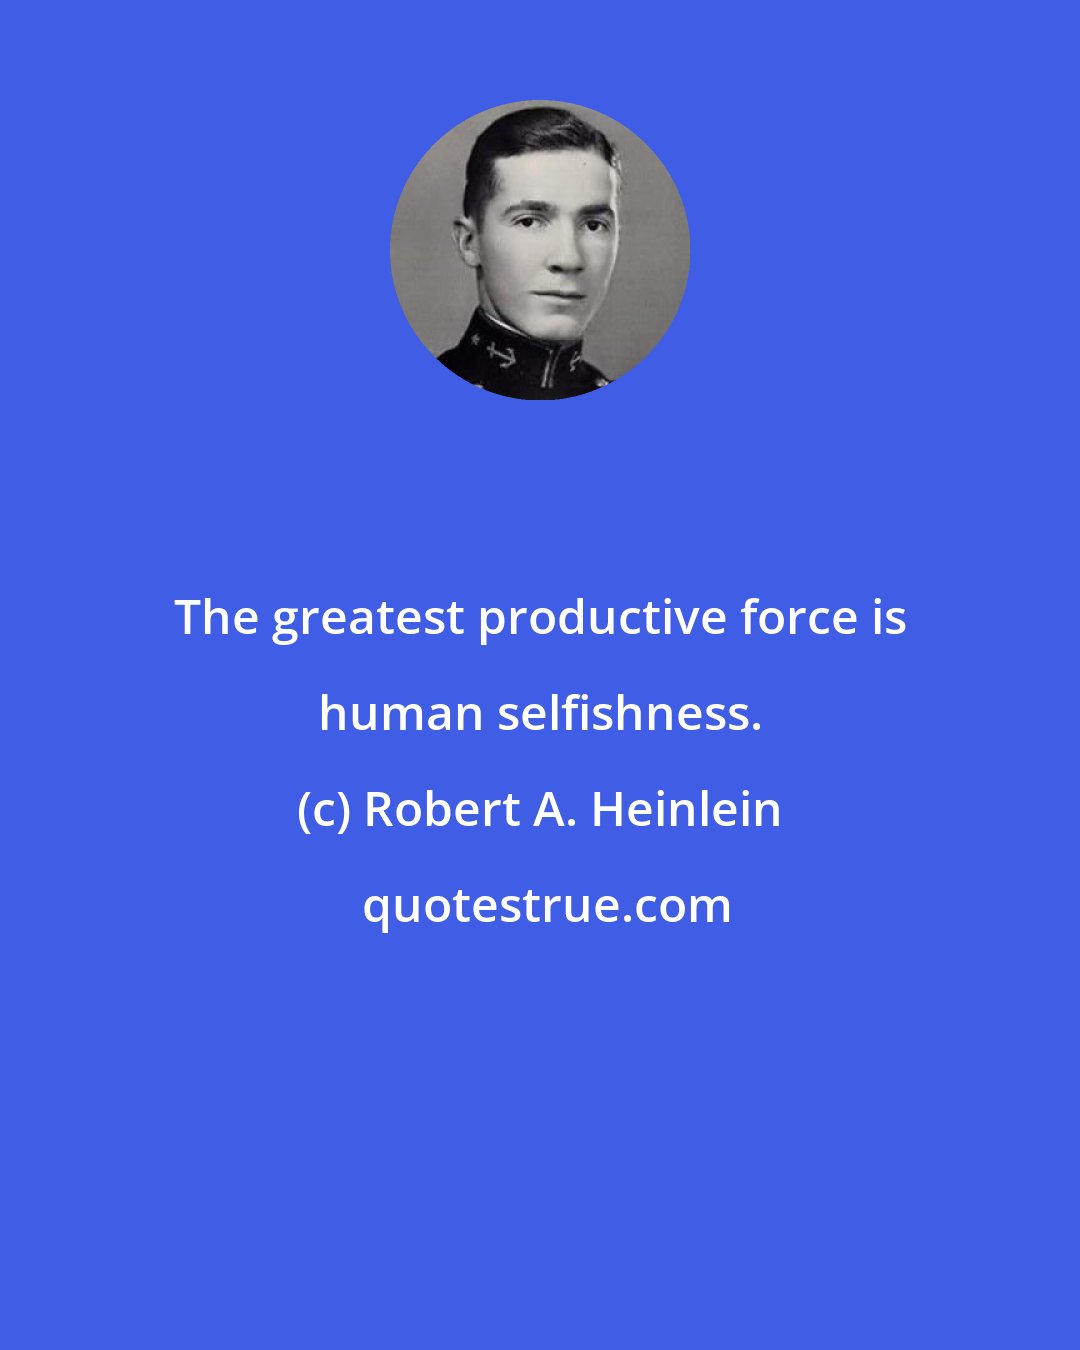 Robert A. Heinlein: The greatest productive force is human selfishness.